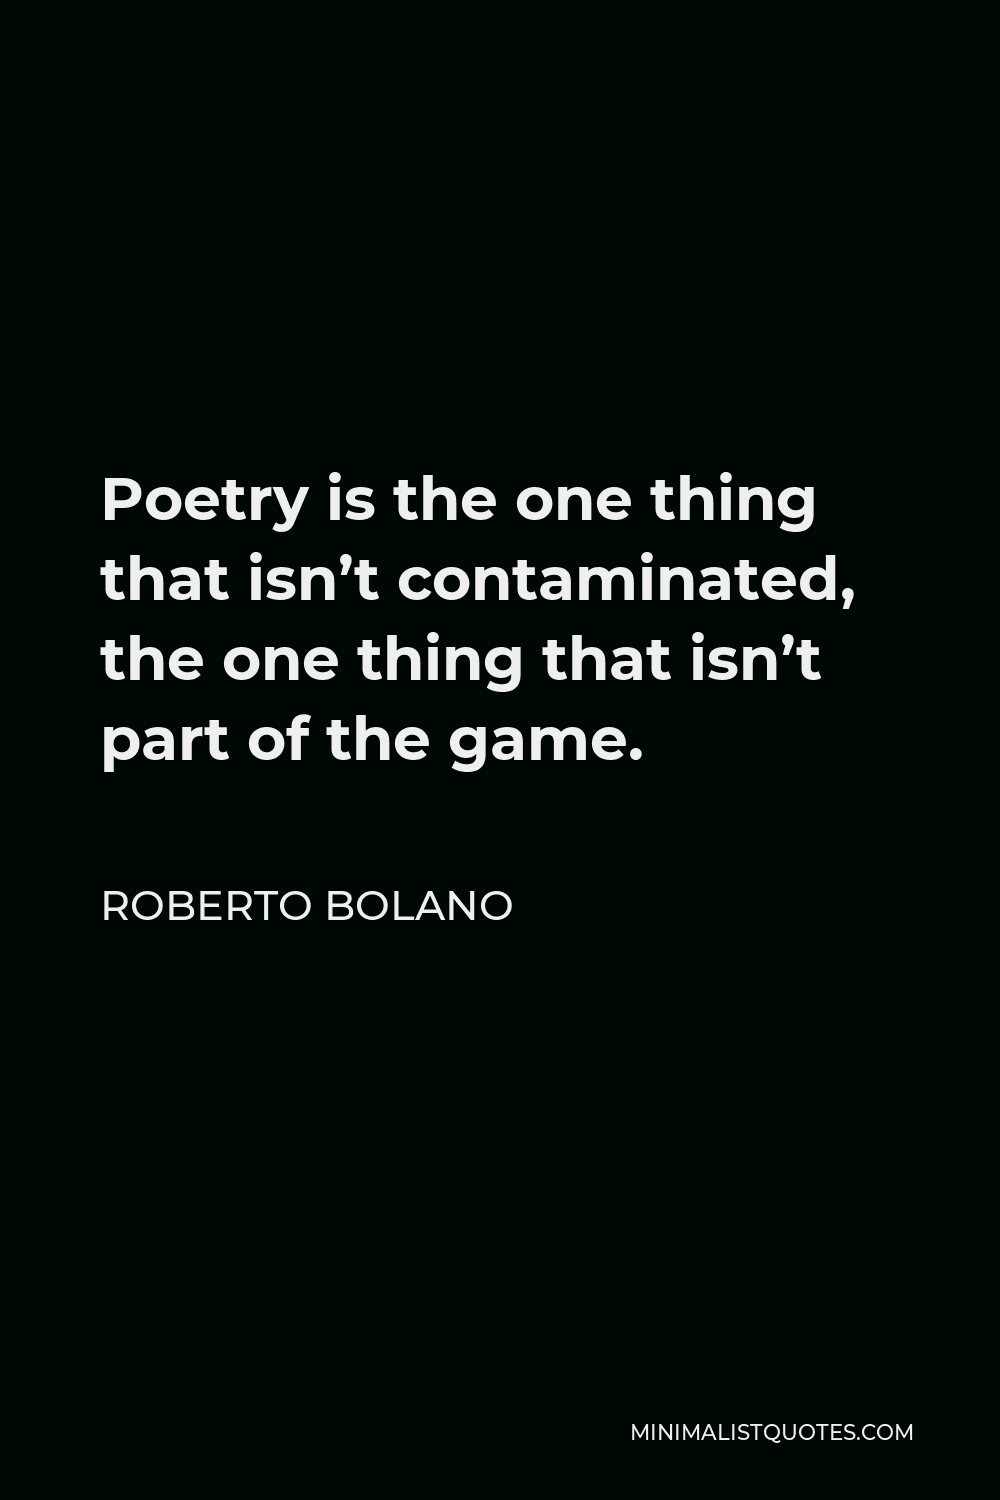 Roberto Bolano Quote - Poetry is the one thing that isn’t contaminated, the one thing that isn’t part of the game.